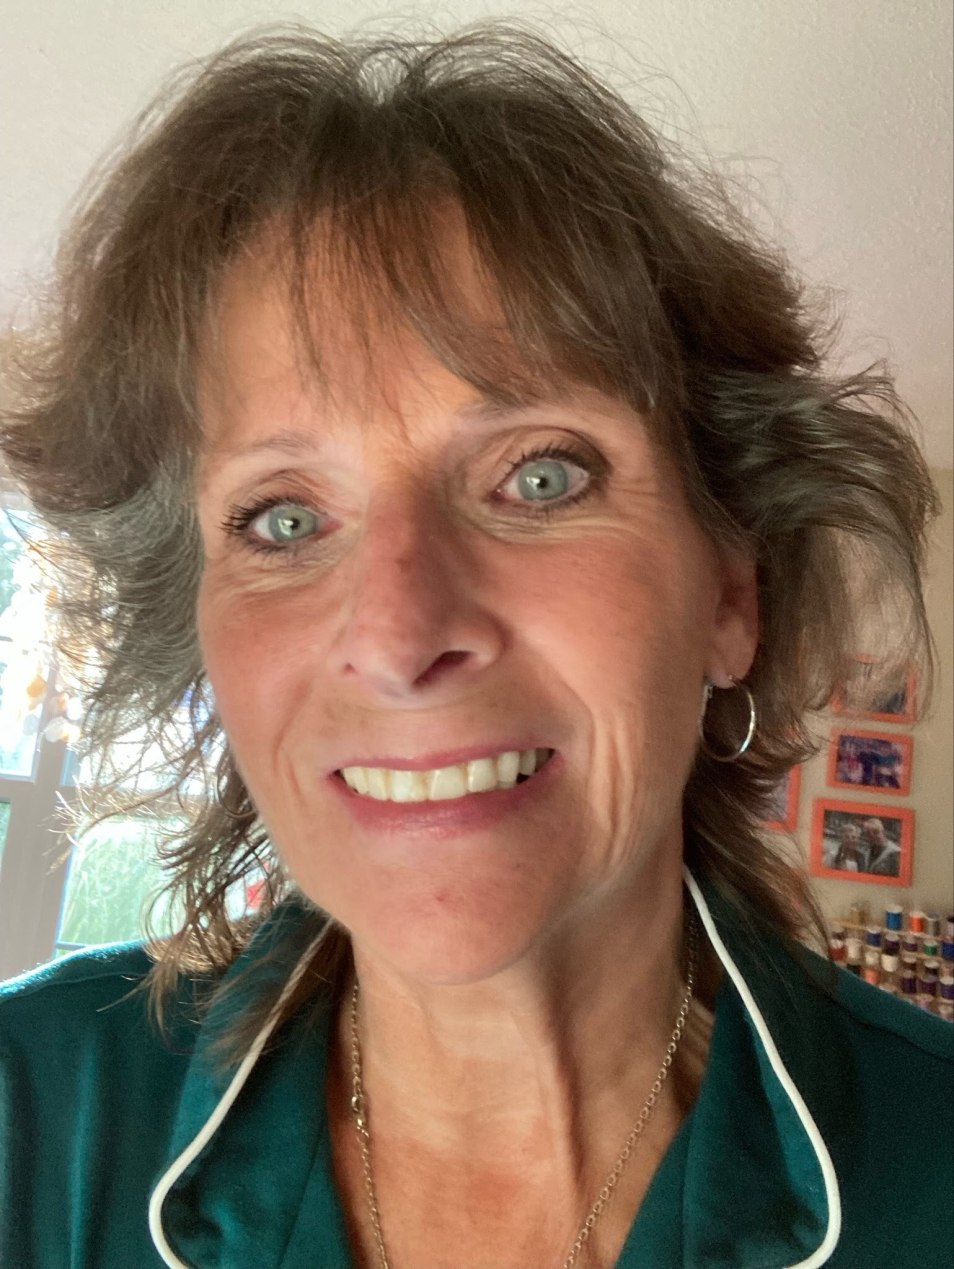 A selfie of Kelly Macauley, a woman in her 60s. She has blue eyes and brown hair with bangs, and smiles at the camera.